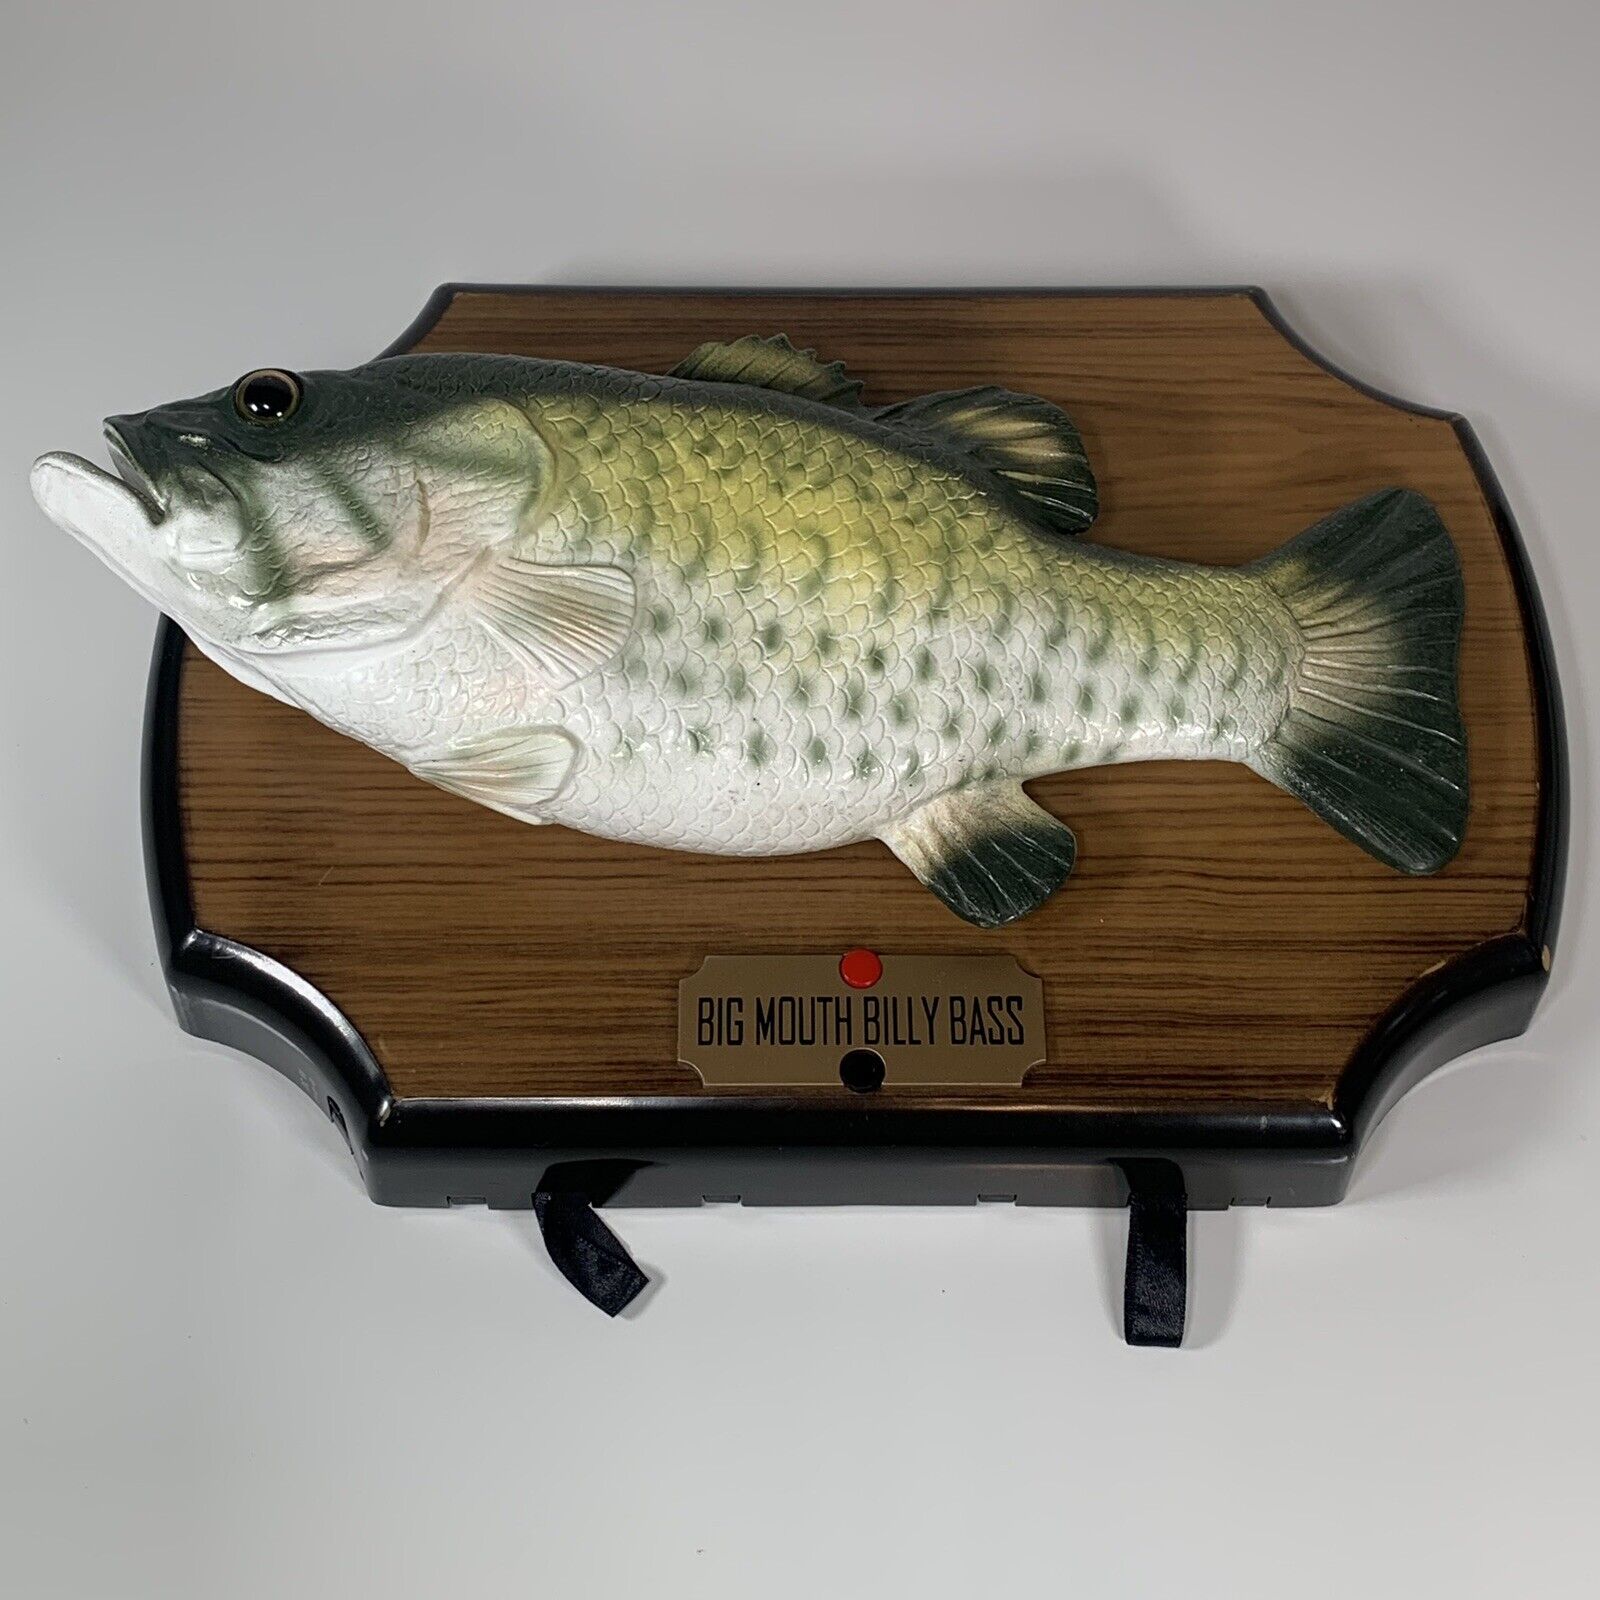 1999 Big Mouth Billy Bass Singing Fish Take Me To The River Don't Worry Be Happy